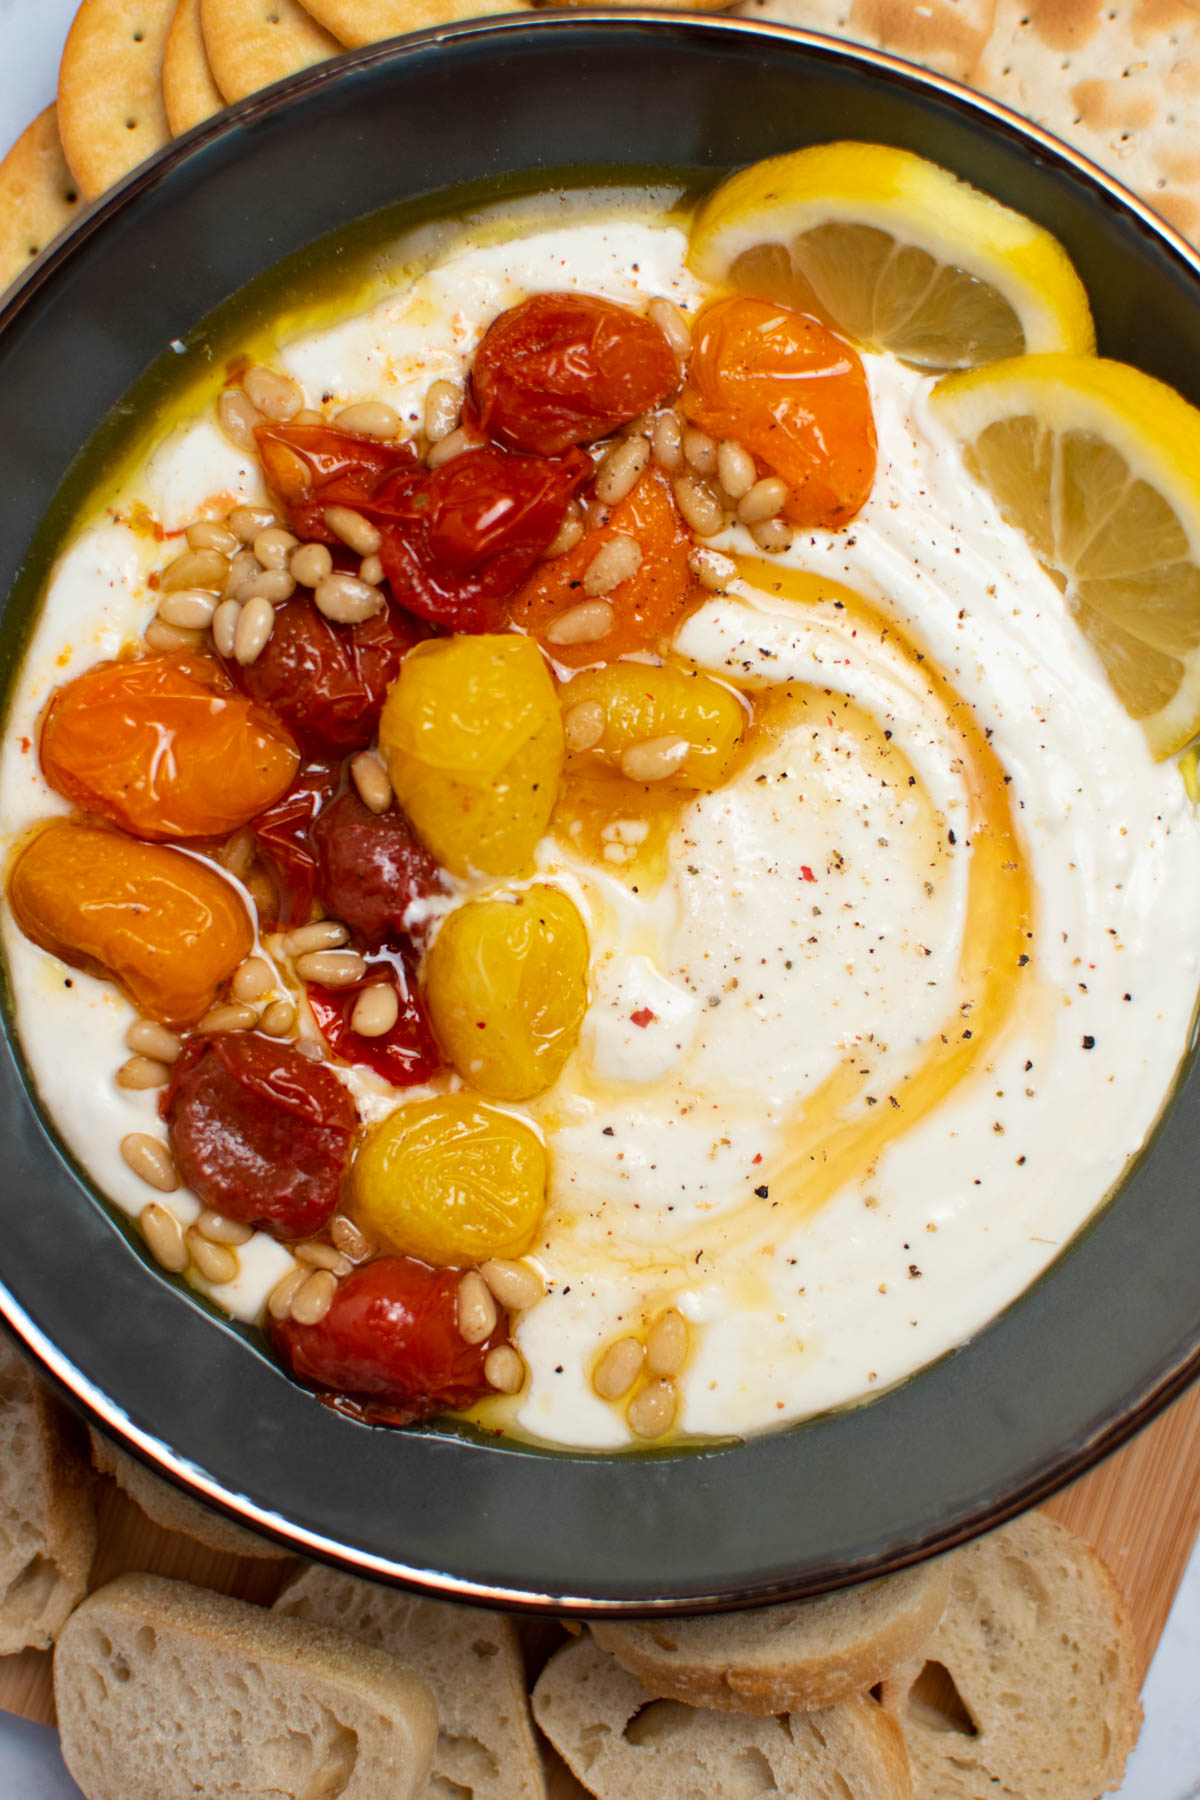 Gray bowl filled with feta dip, roasted tomatoes, pine nuts, honey, and lemon slices.